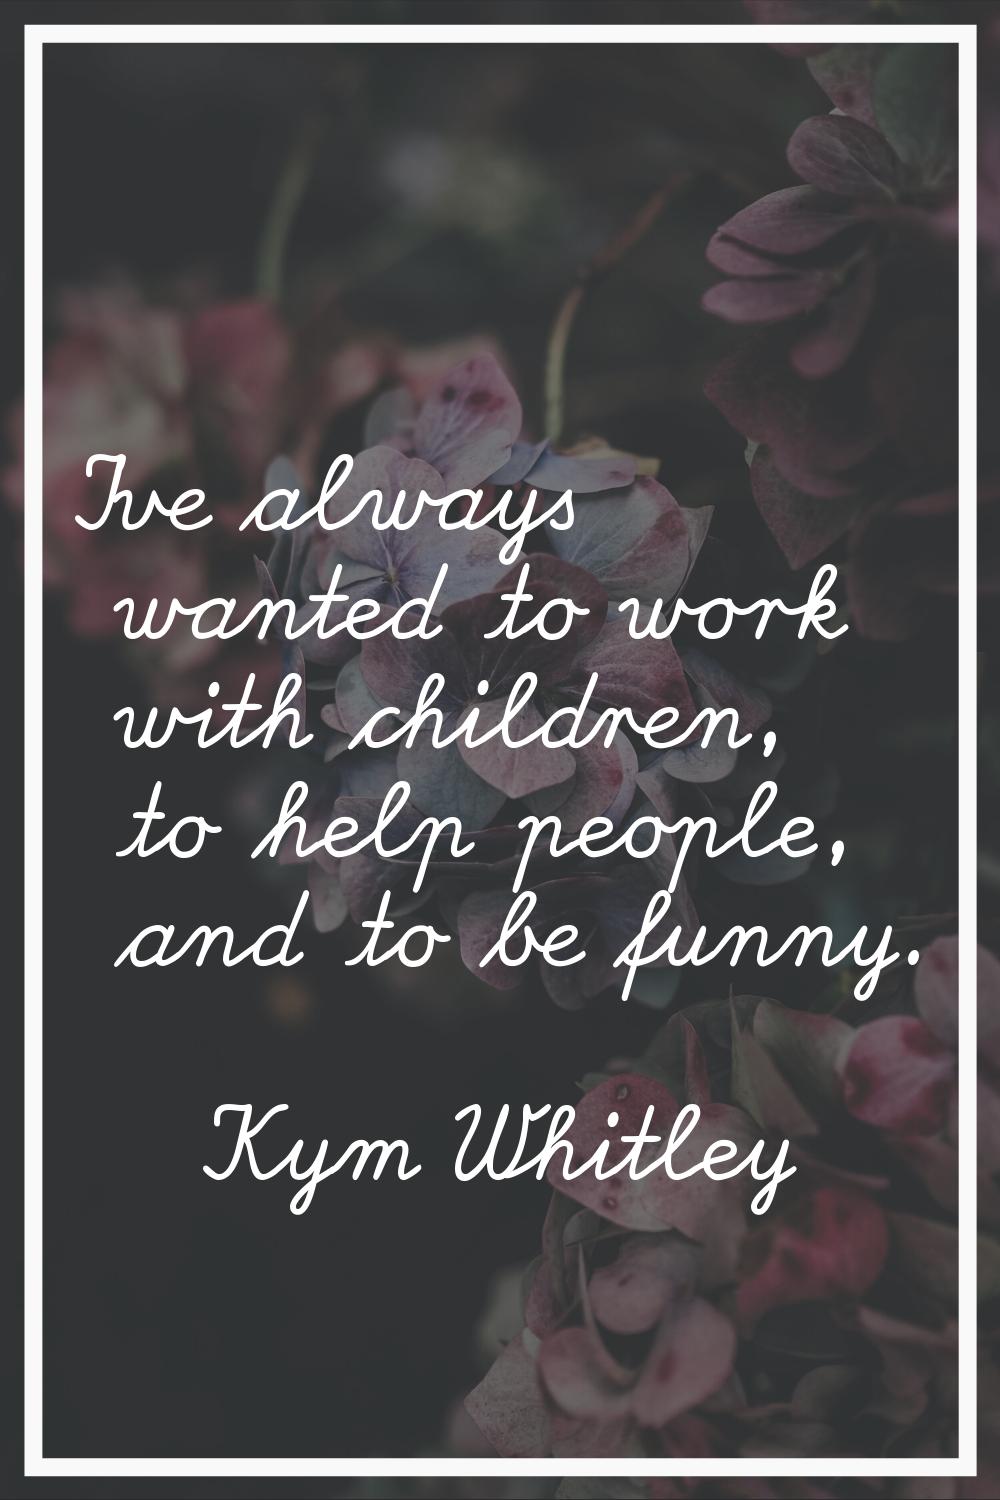 I've always wanted to work with children, to help people, and to be funny.